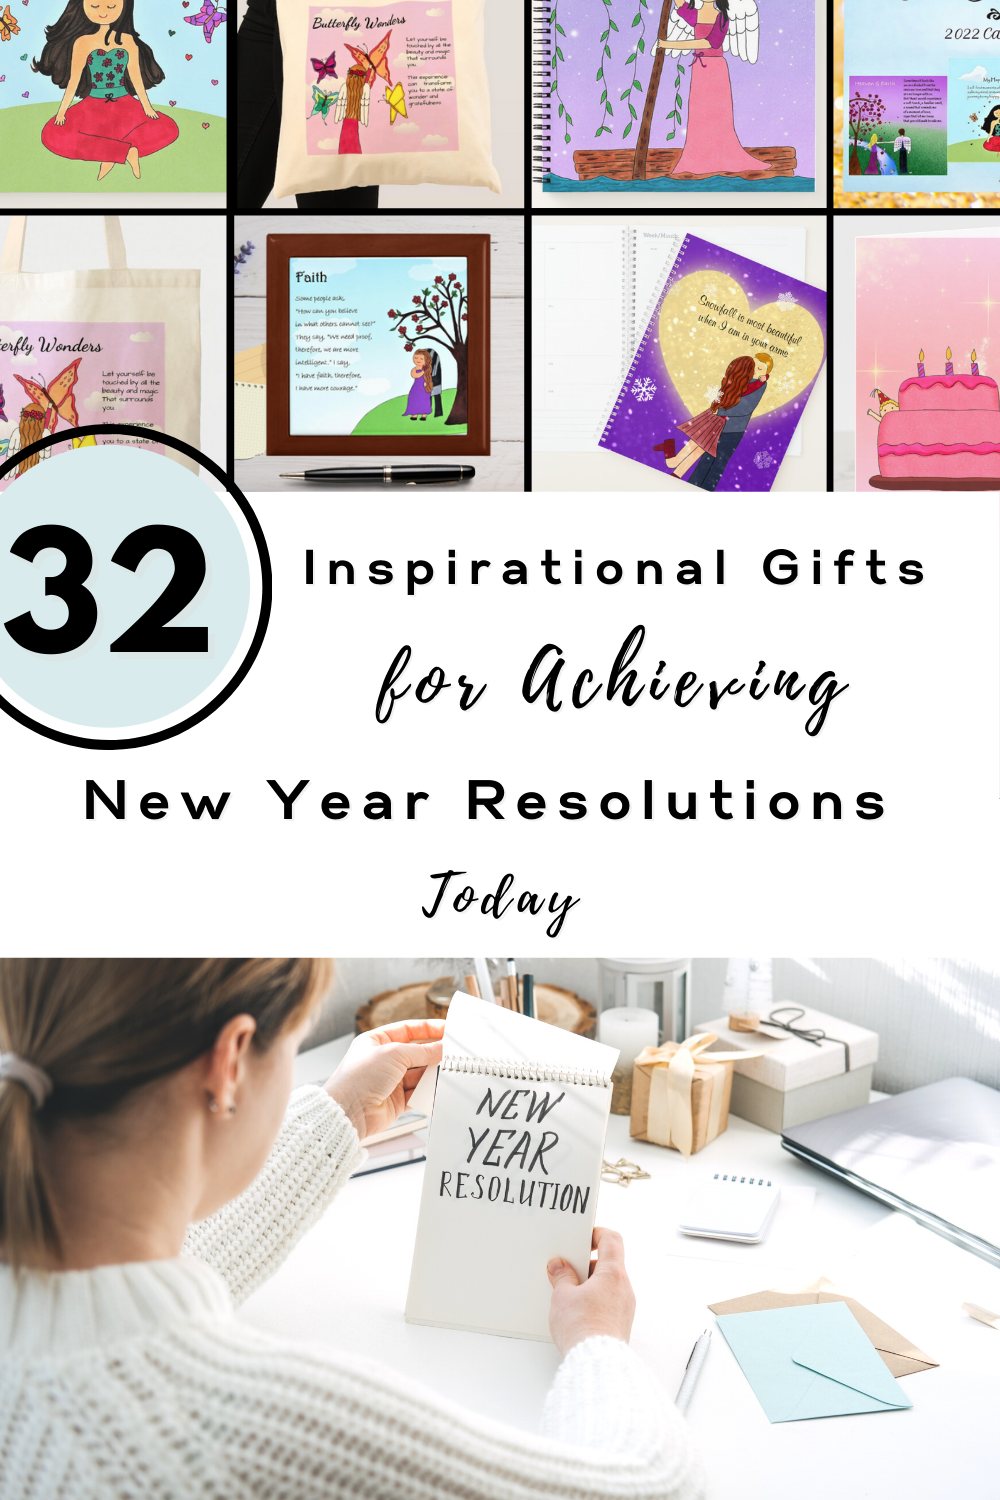 32 Inspirational Gifts for Achieving New Year Resolutions Today